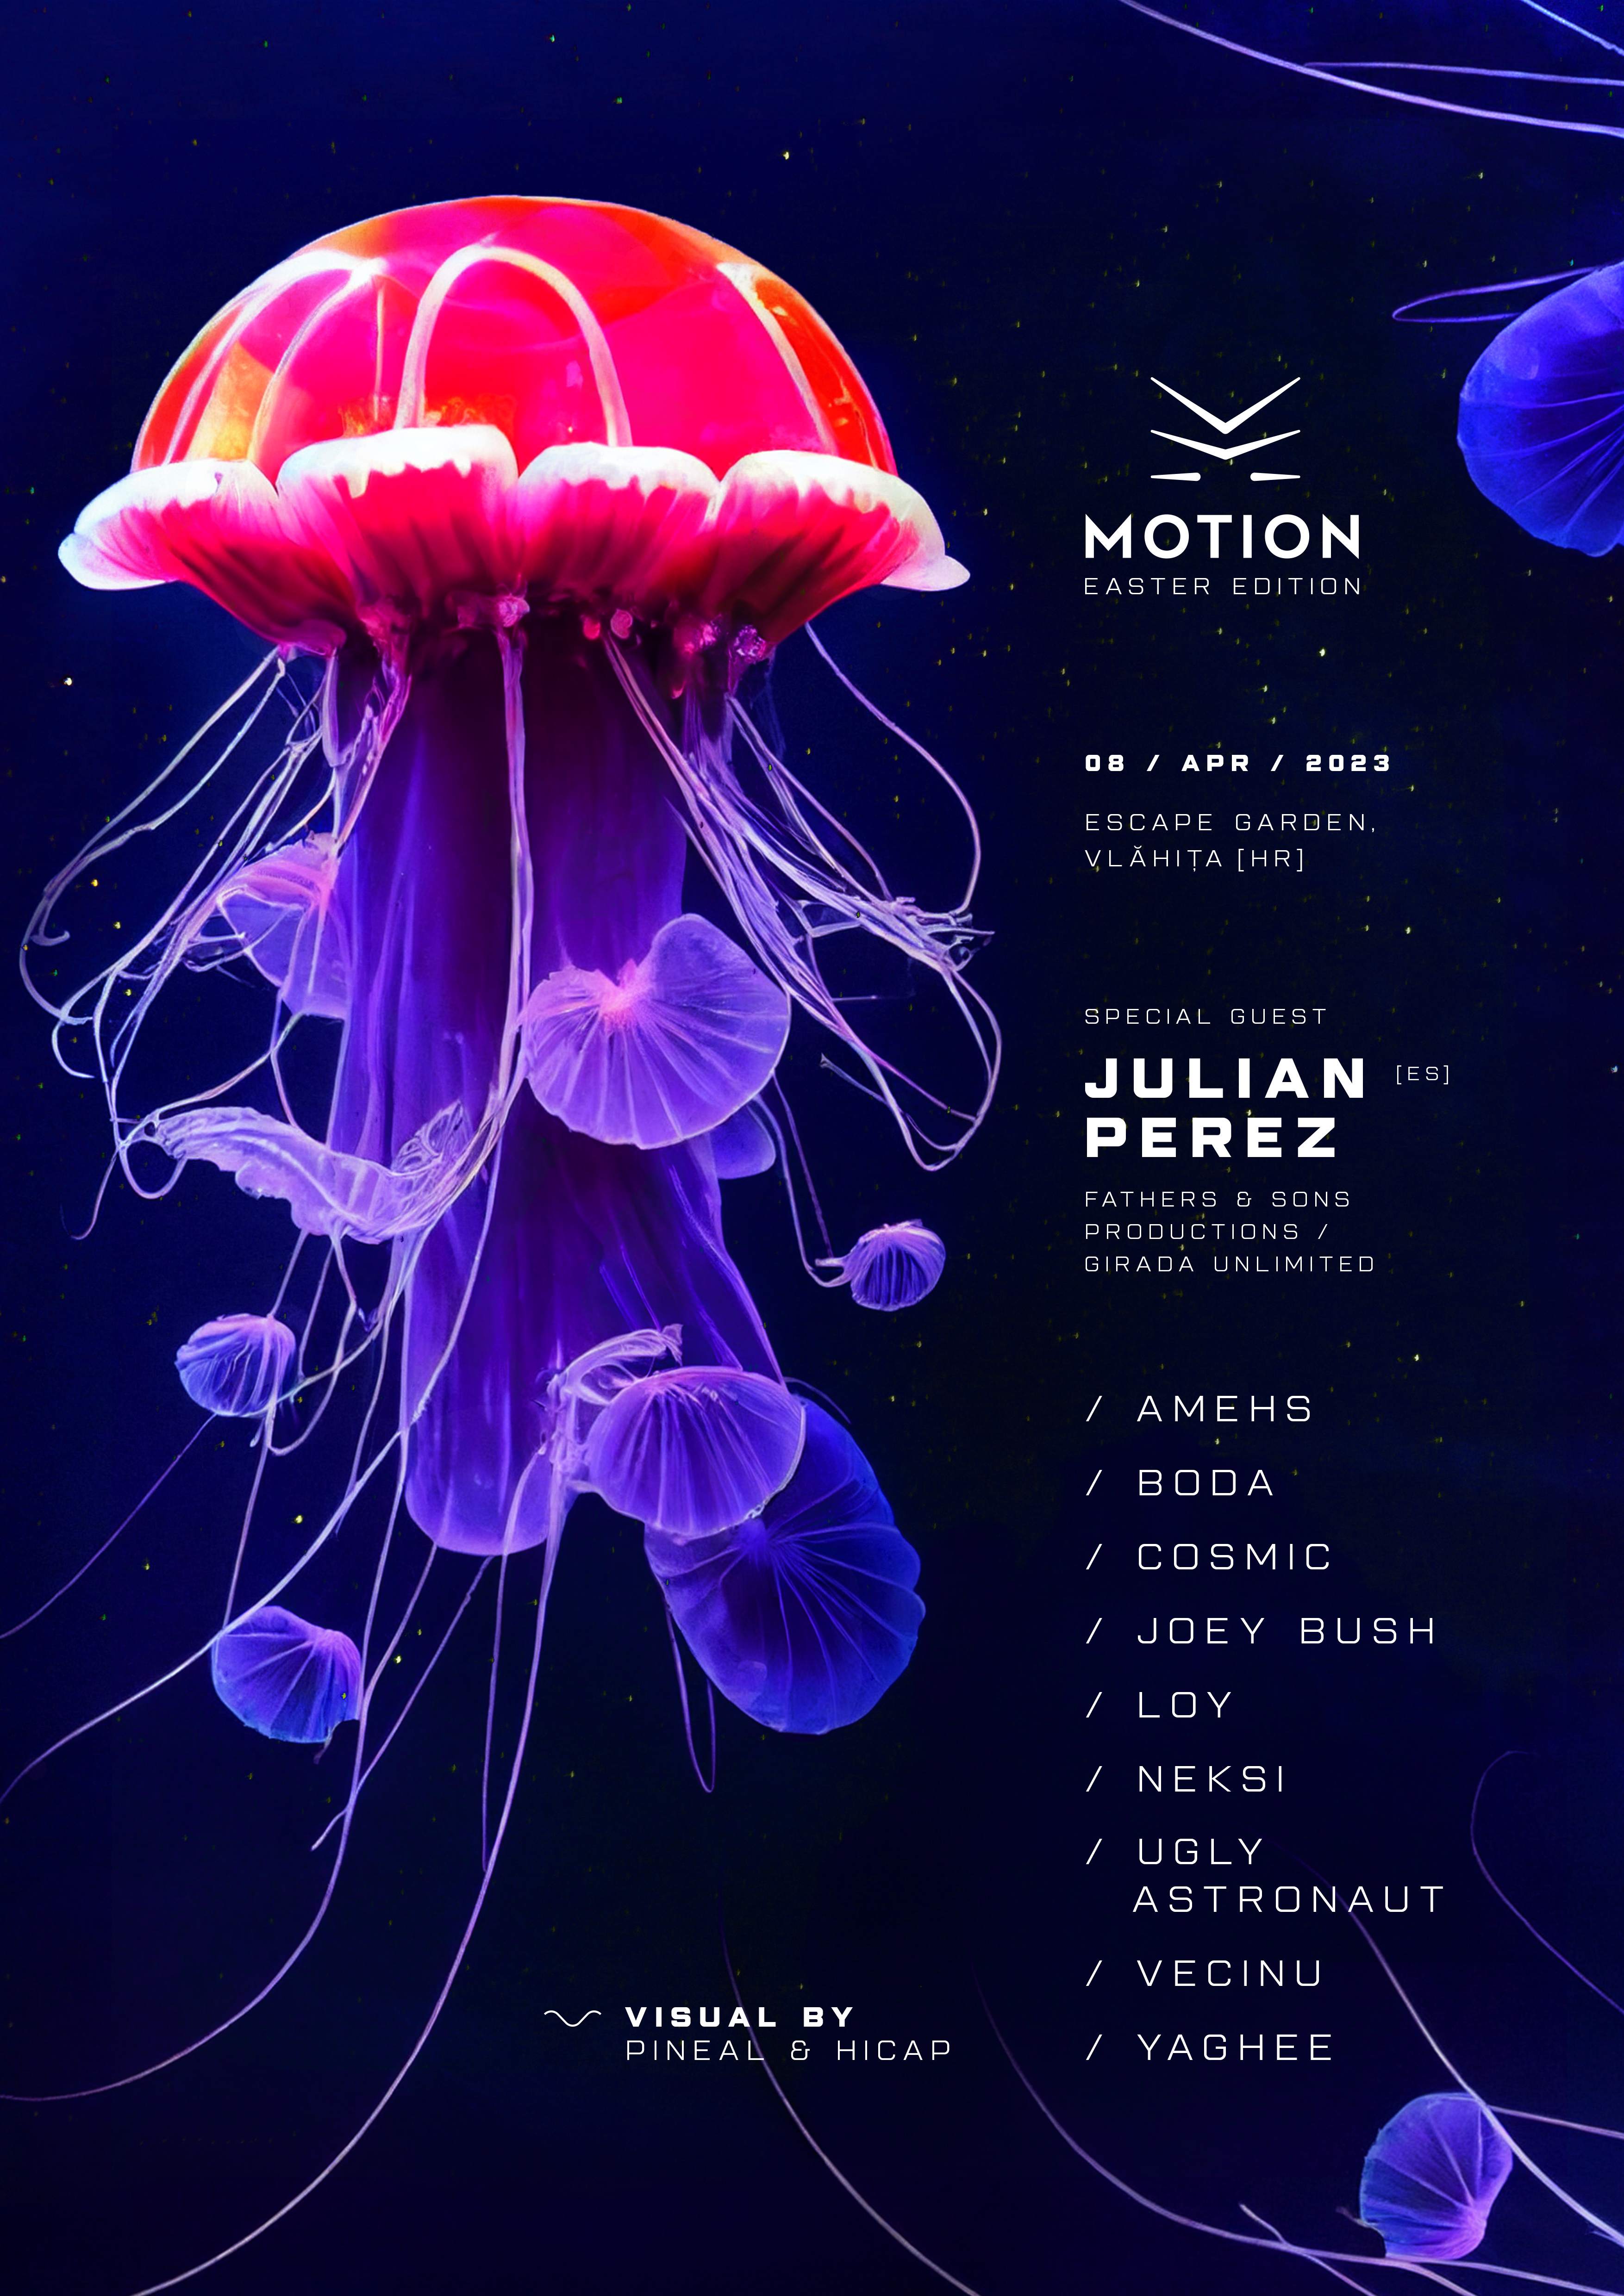 Motion Easter Edition with Julian Perez / LOy - Página frontal